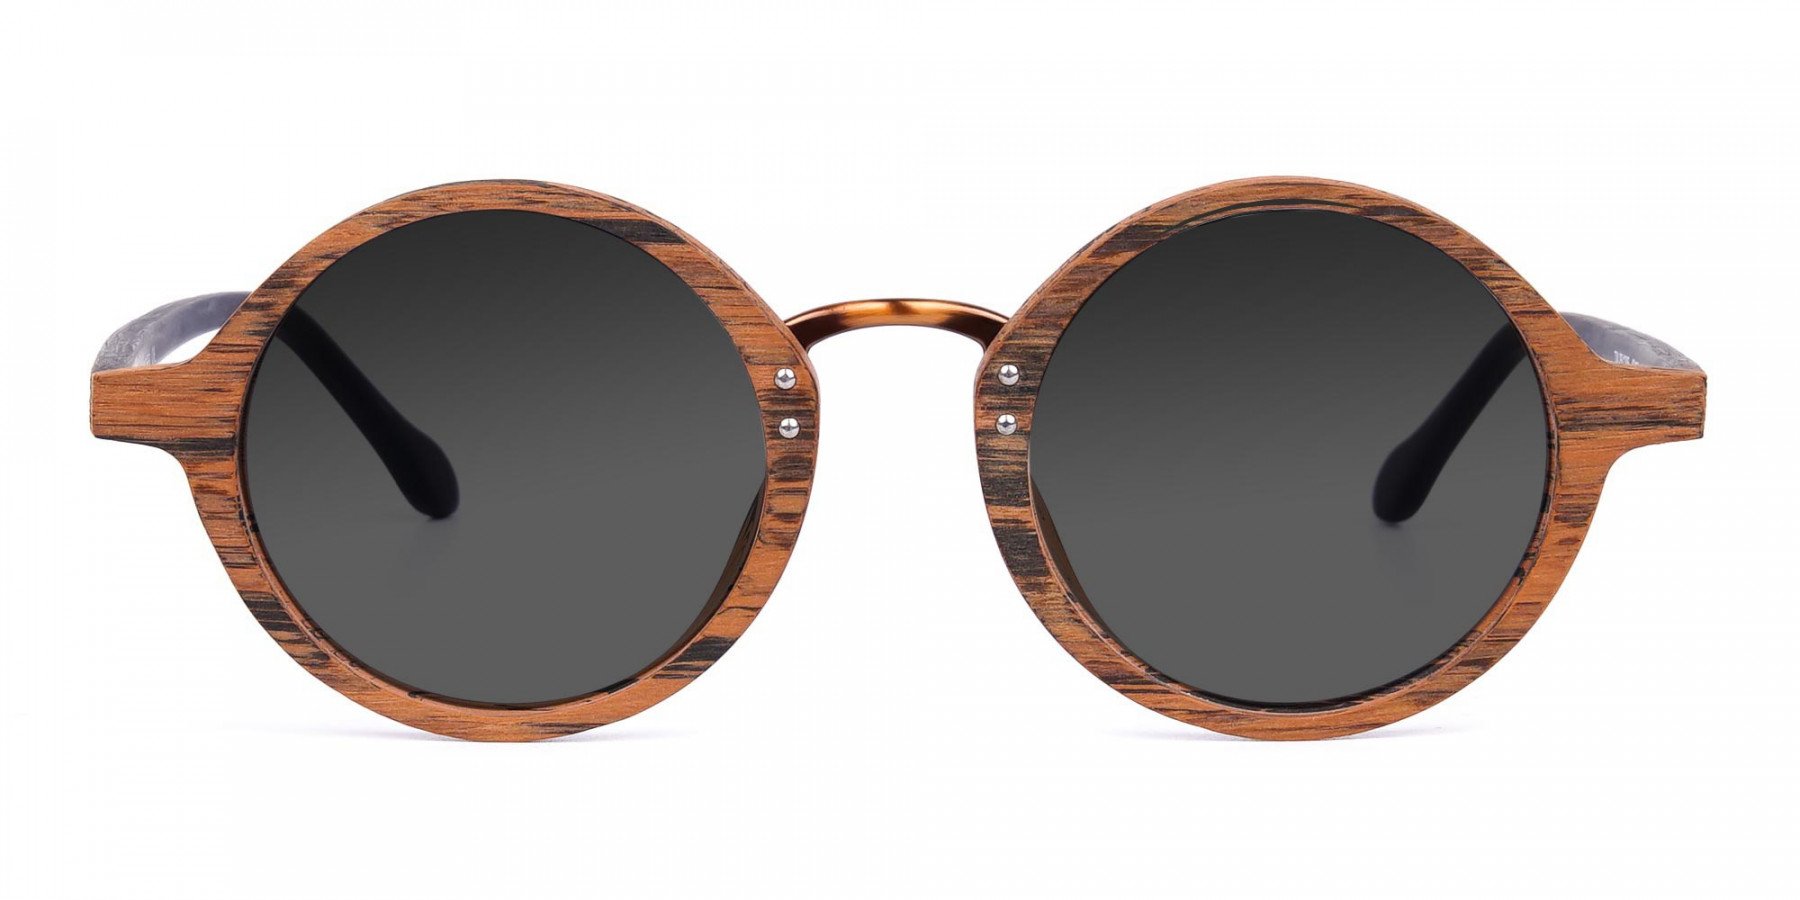 Round-Brown-Wood-Sunglasses-With-Grey-Tint-3